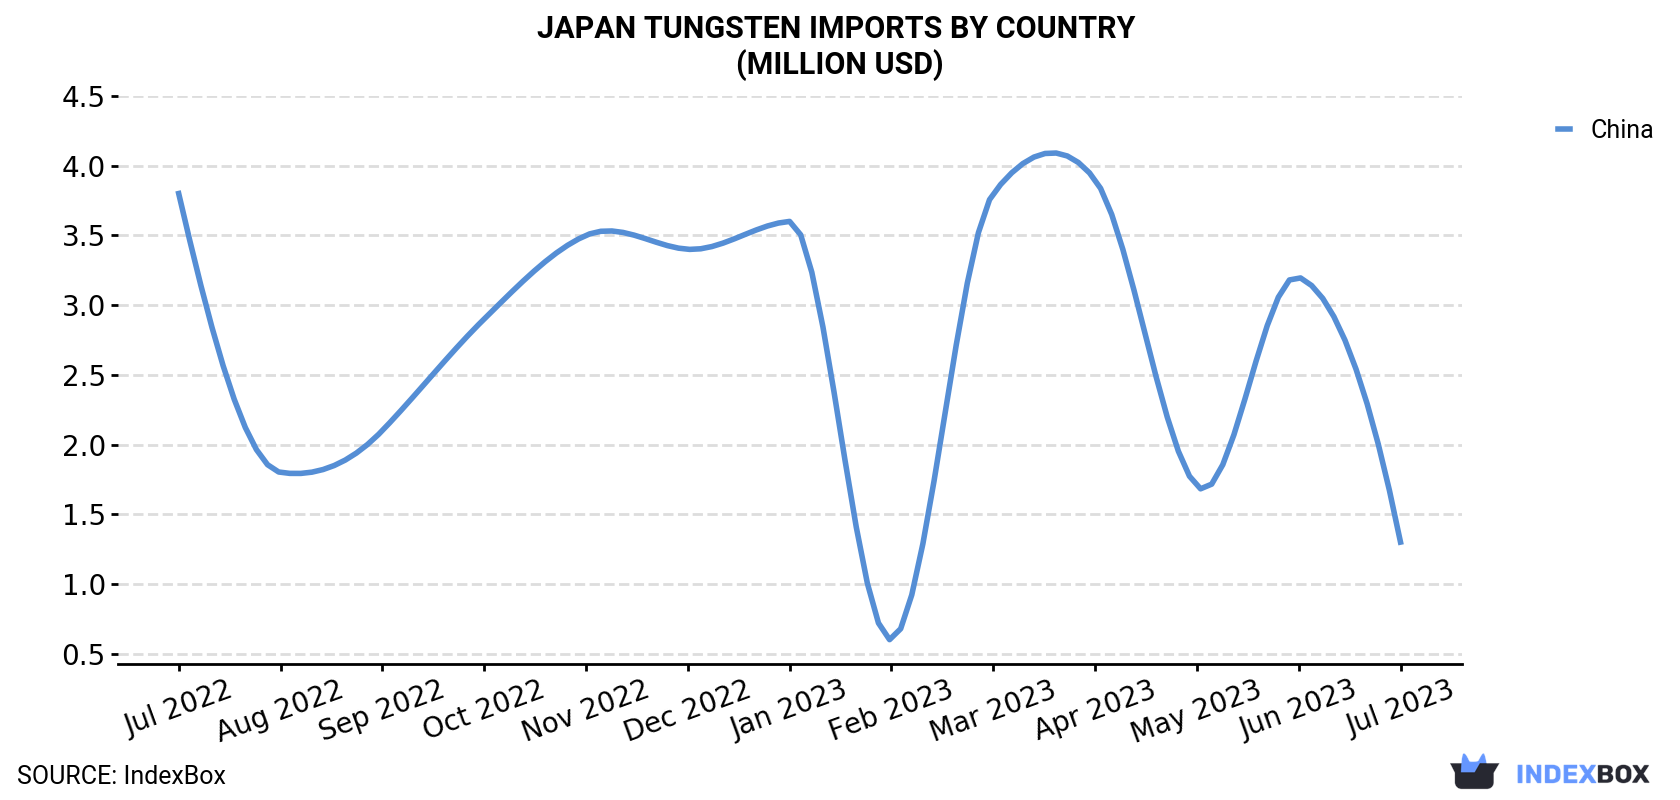 Japan Tungsten Imports By Country (Million USD)